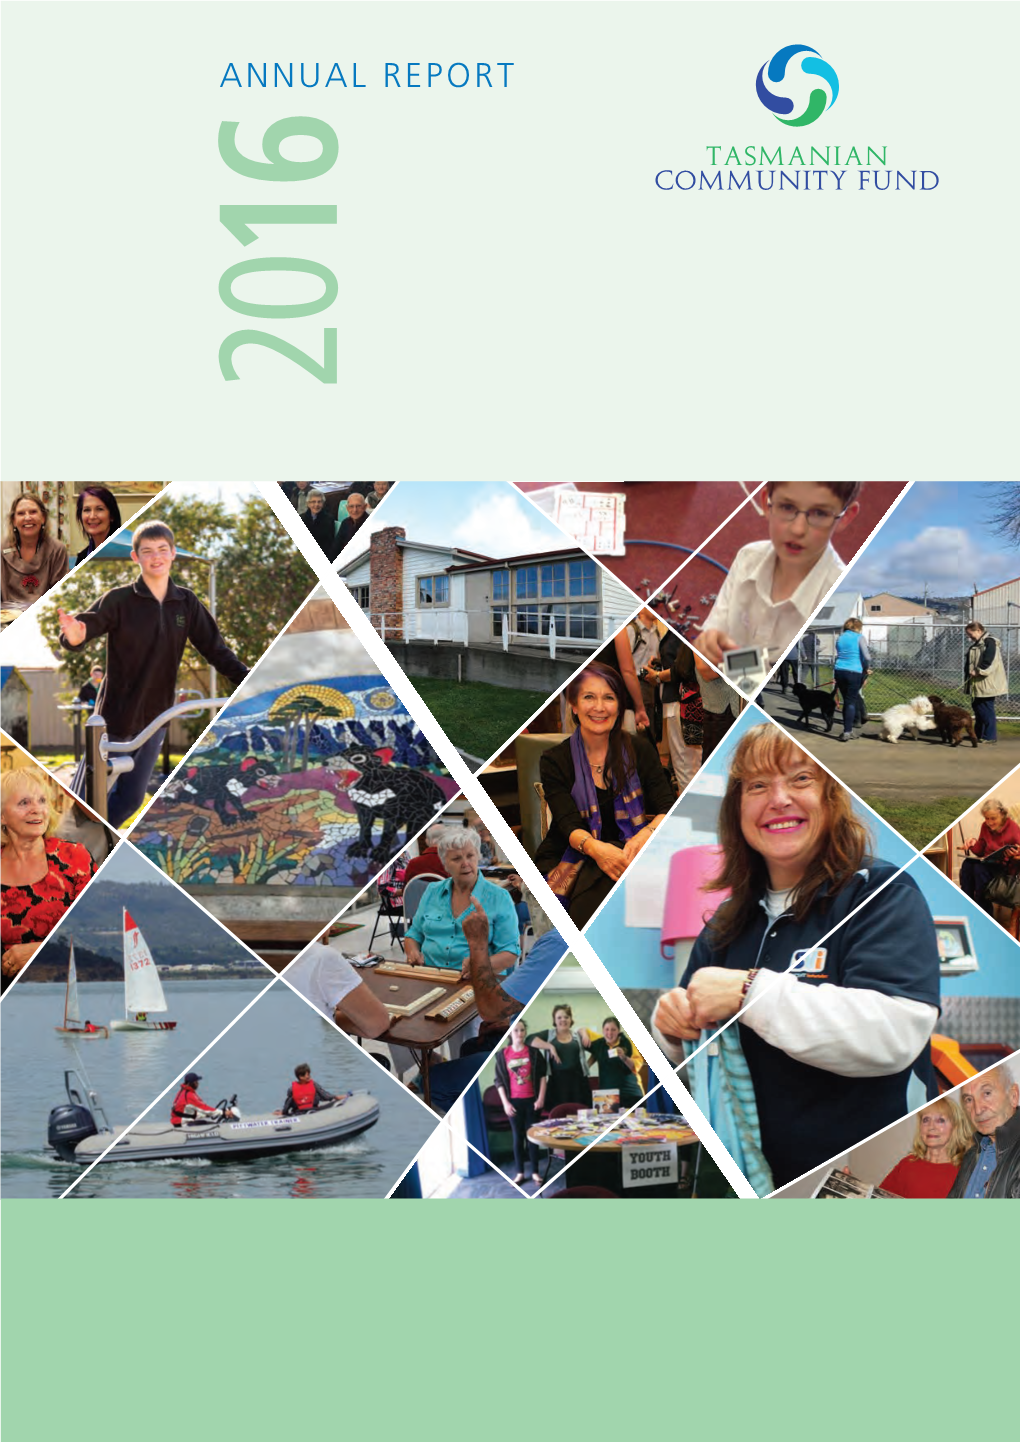 Annual Report 20 16 Highlights for 2015-16